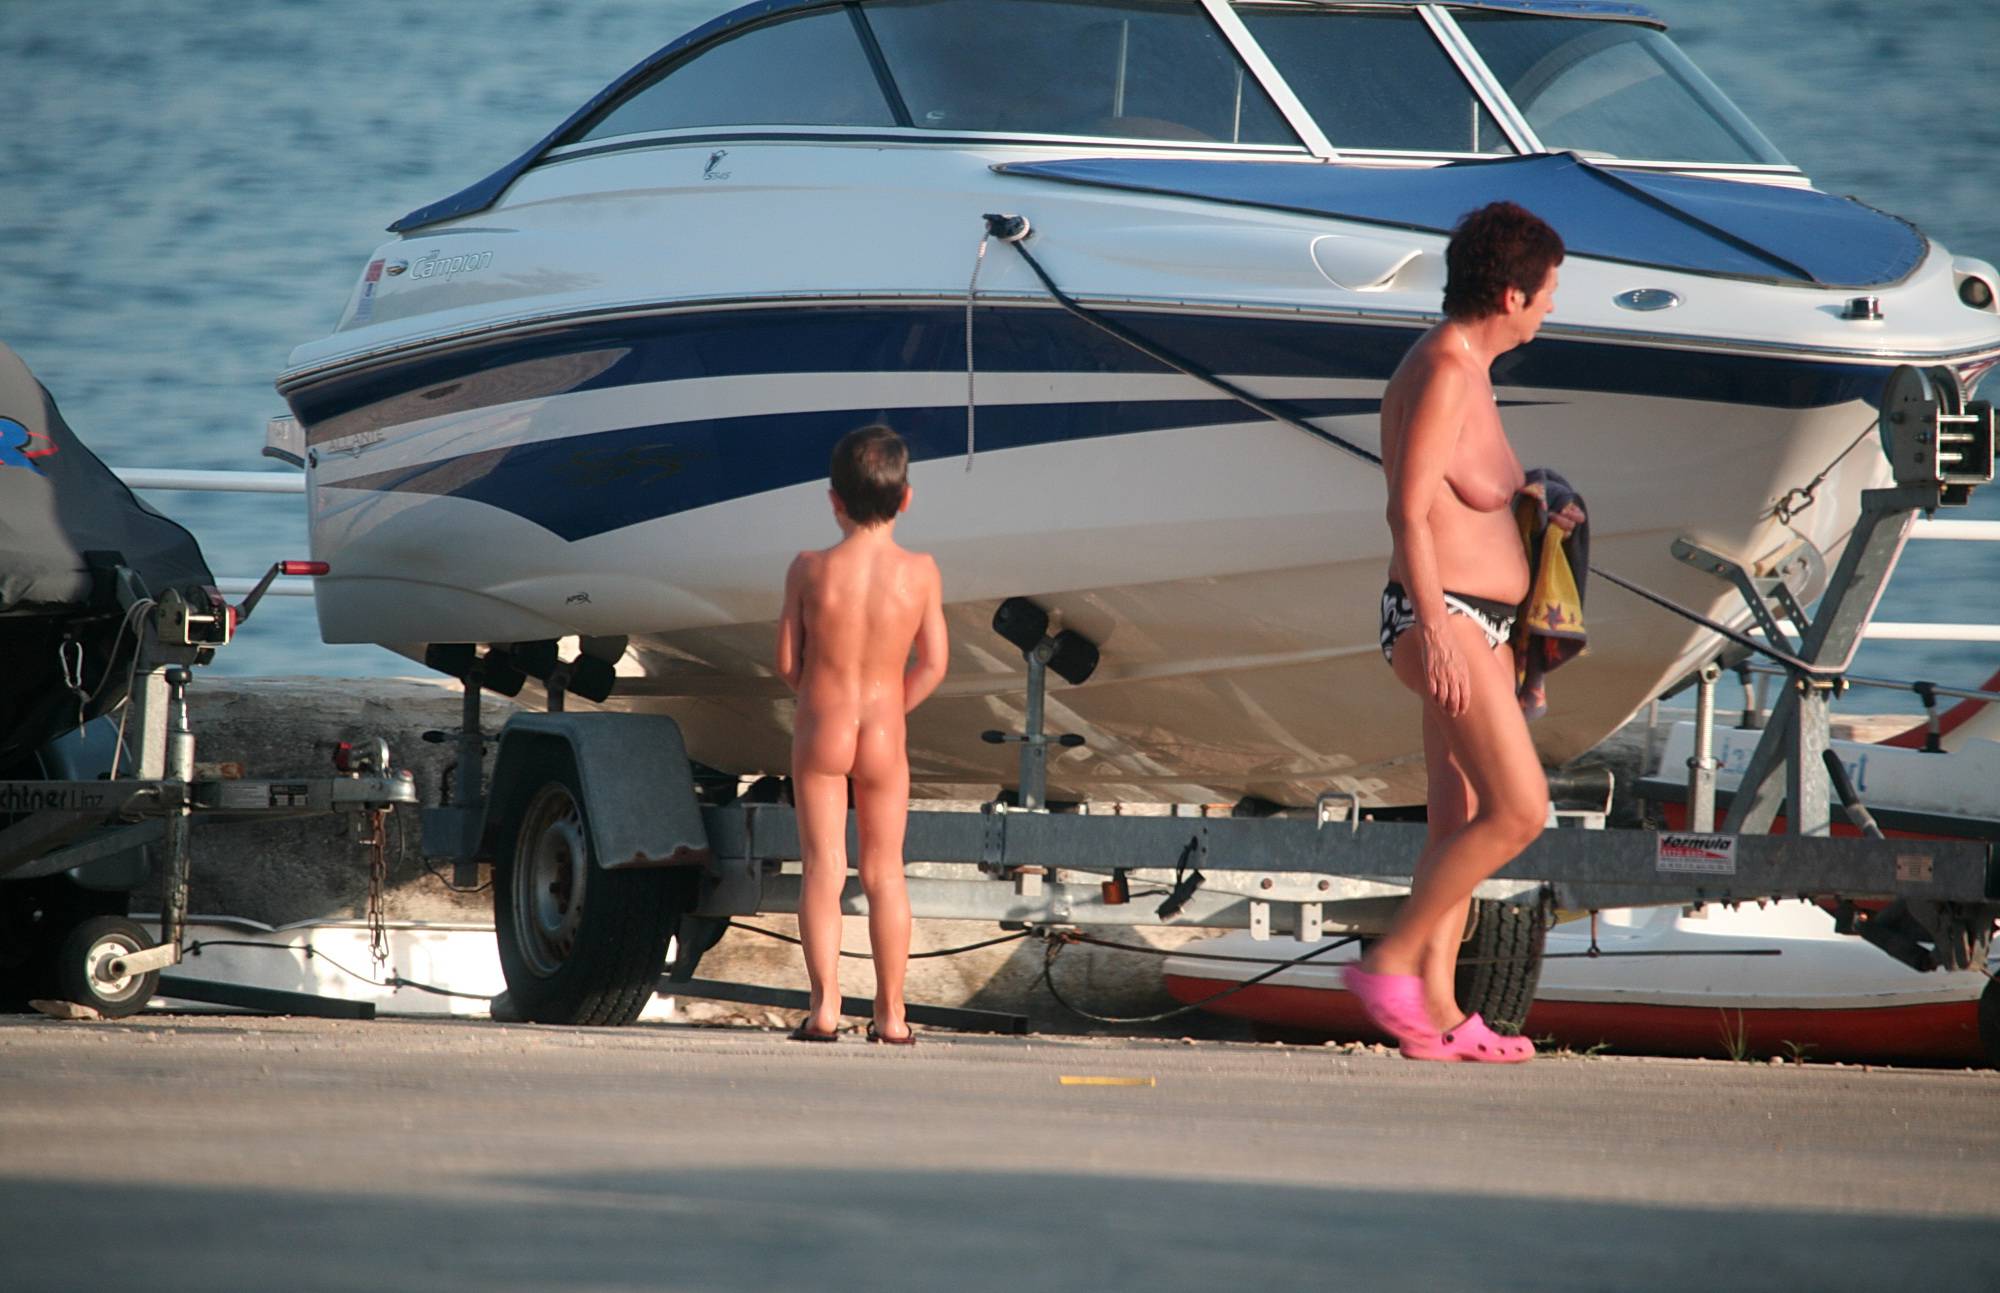 Pure Nudism Photos-Walk by the Boats and Car - 4